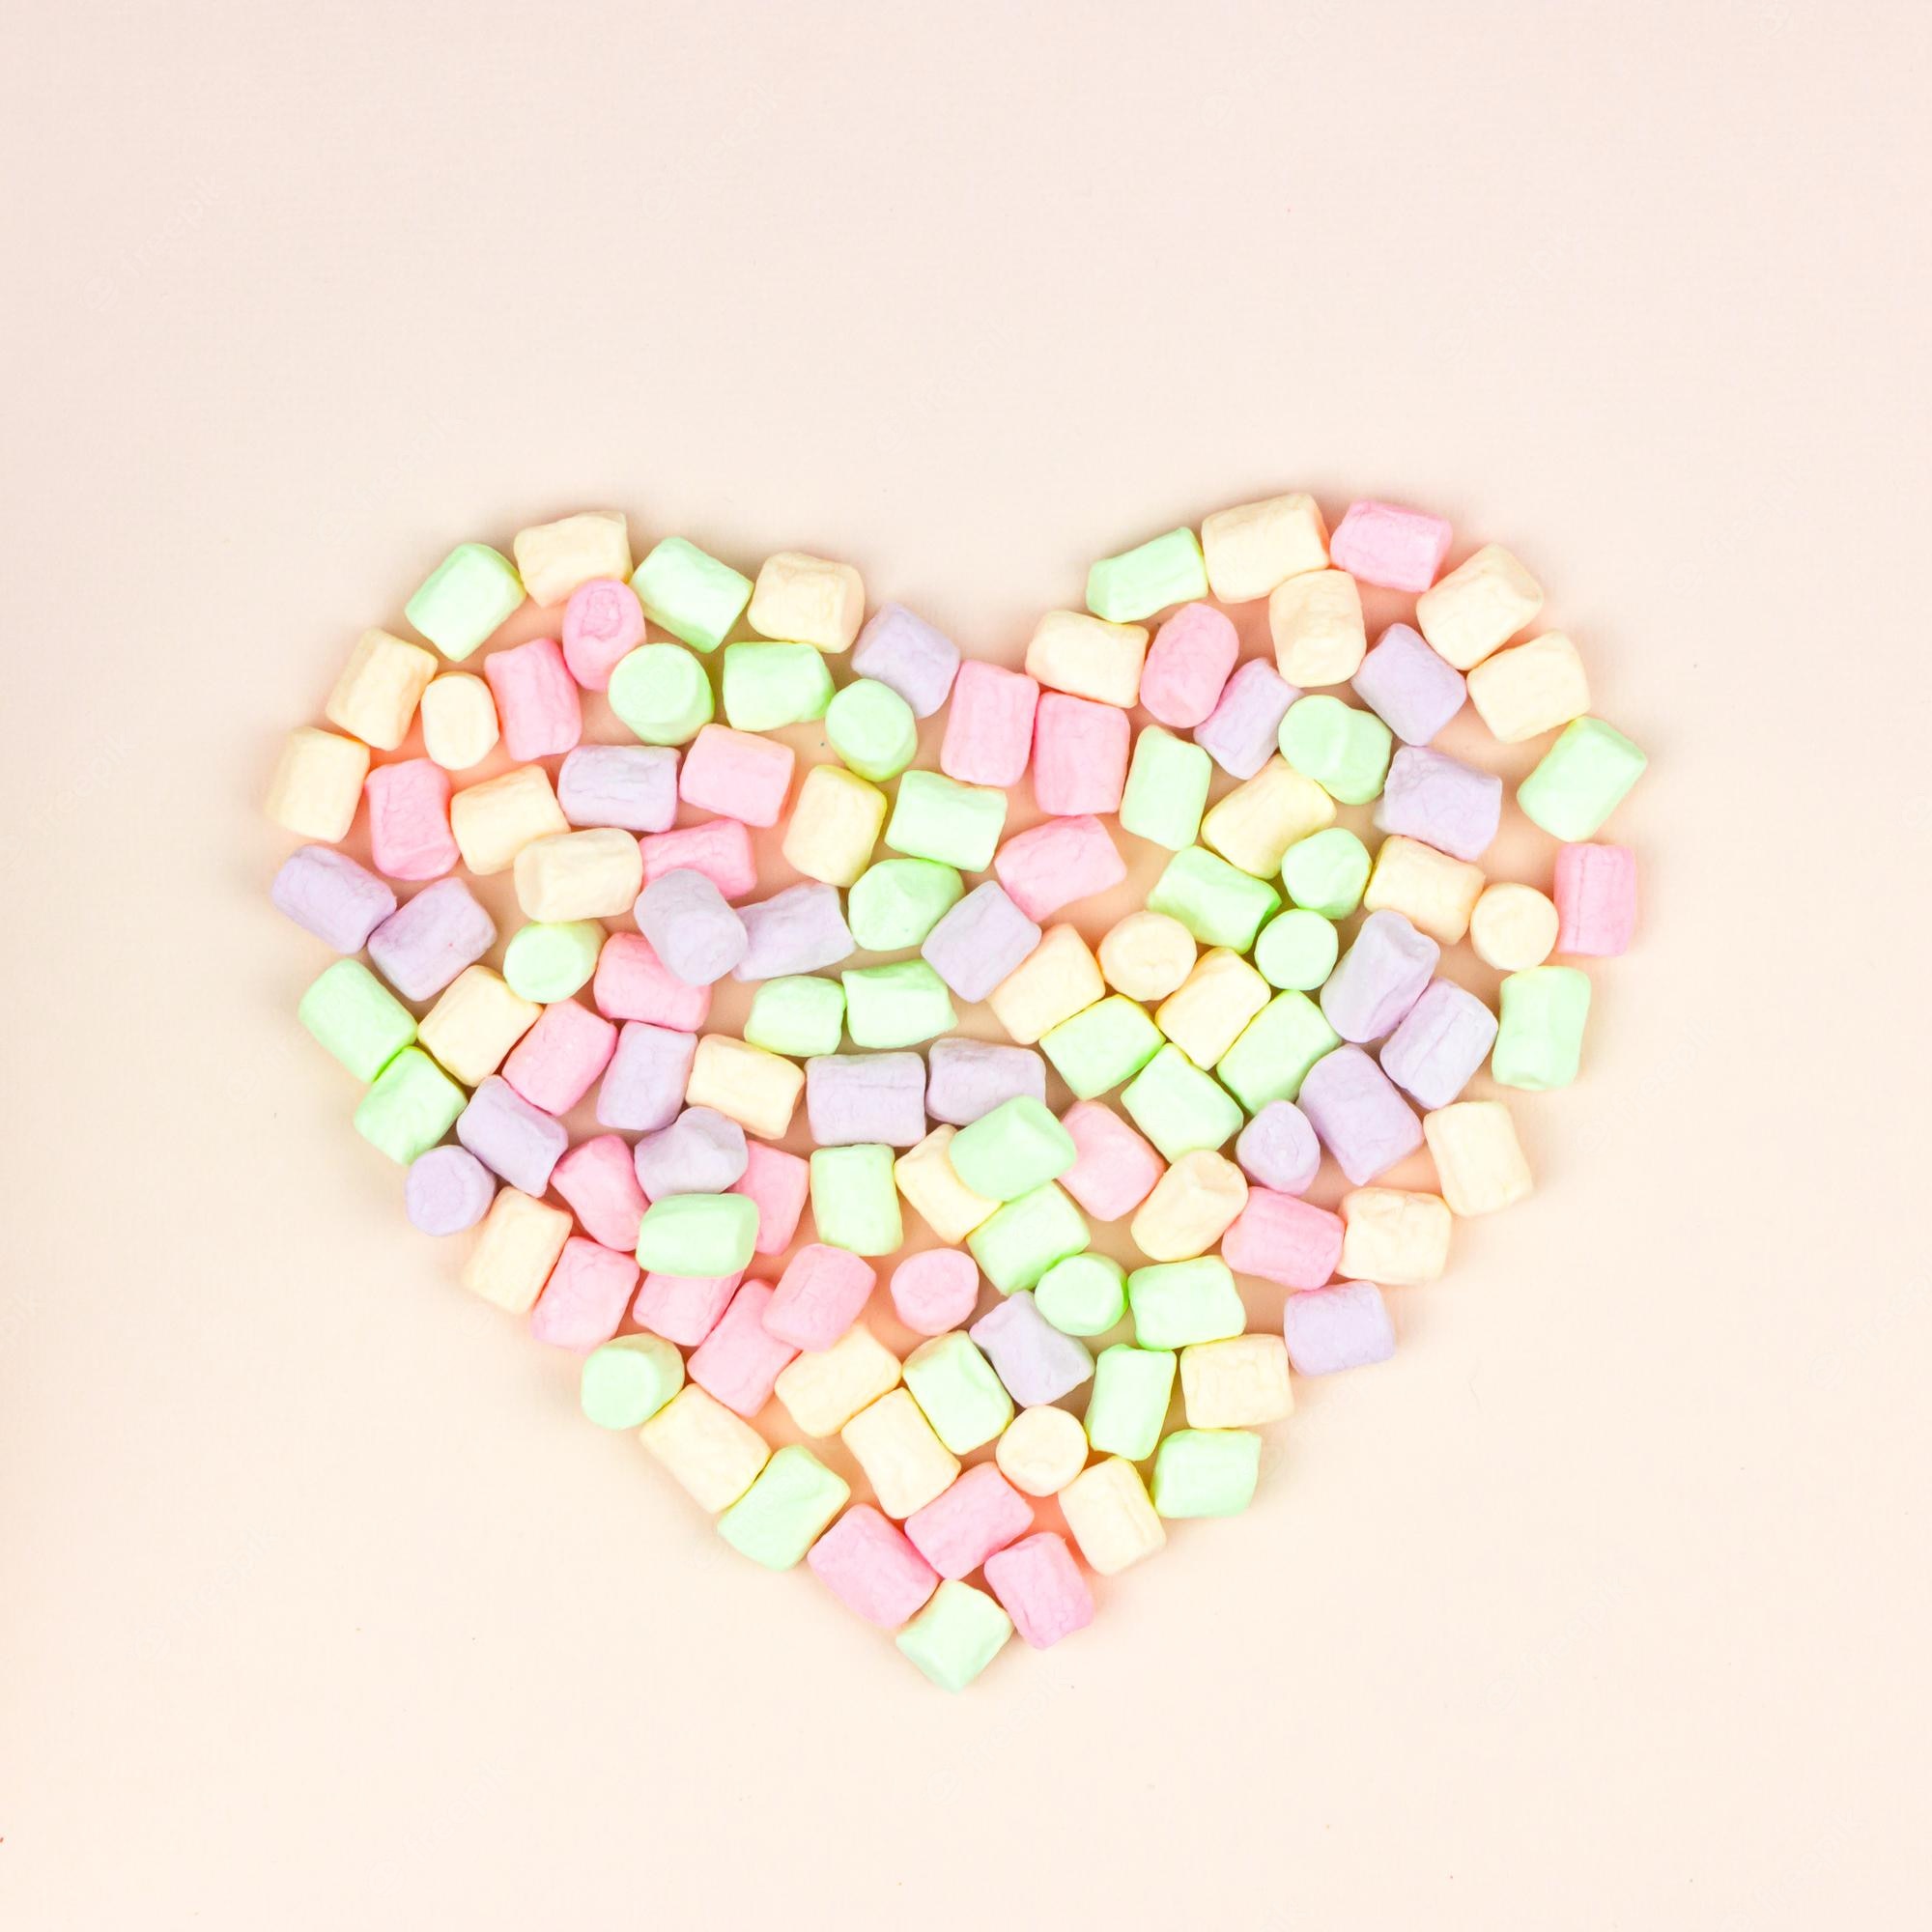 Premium Photo. Heart marshmallows background. top view, sweets and candy concept. pastel color dessert for background or wallpaper decor